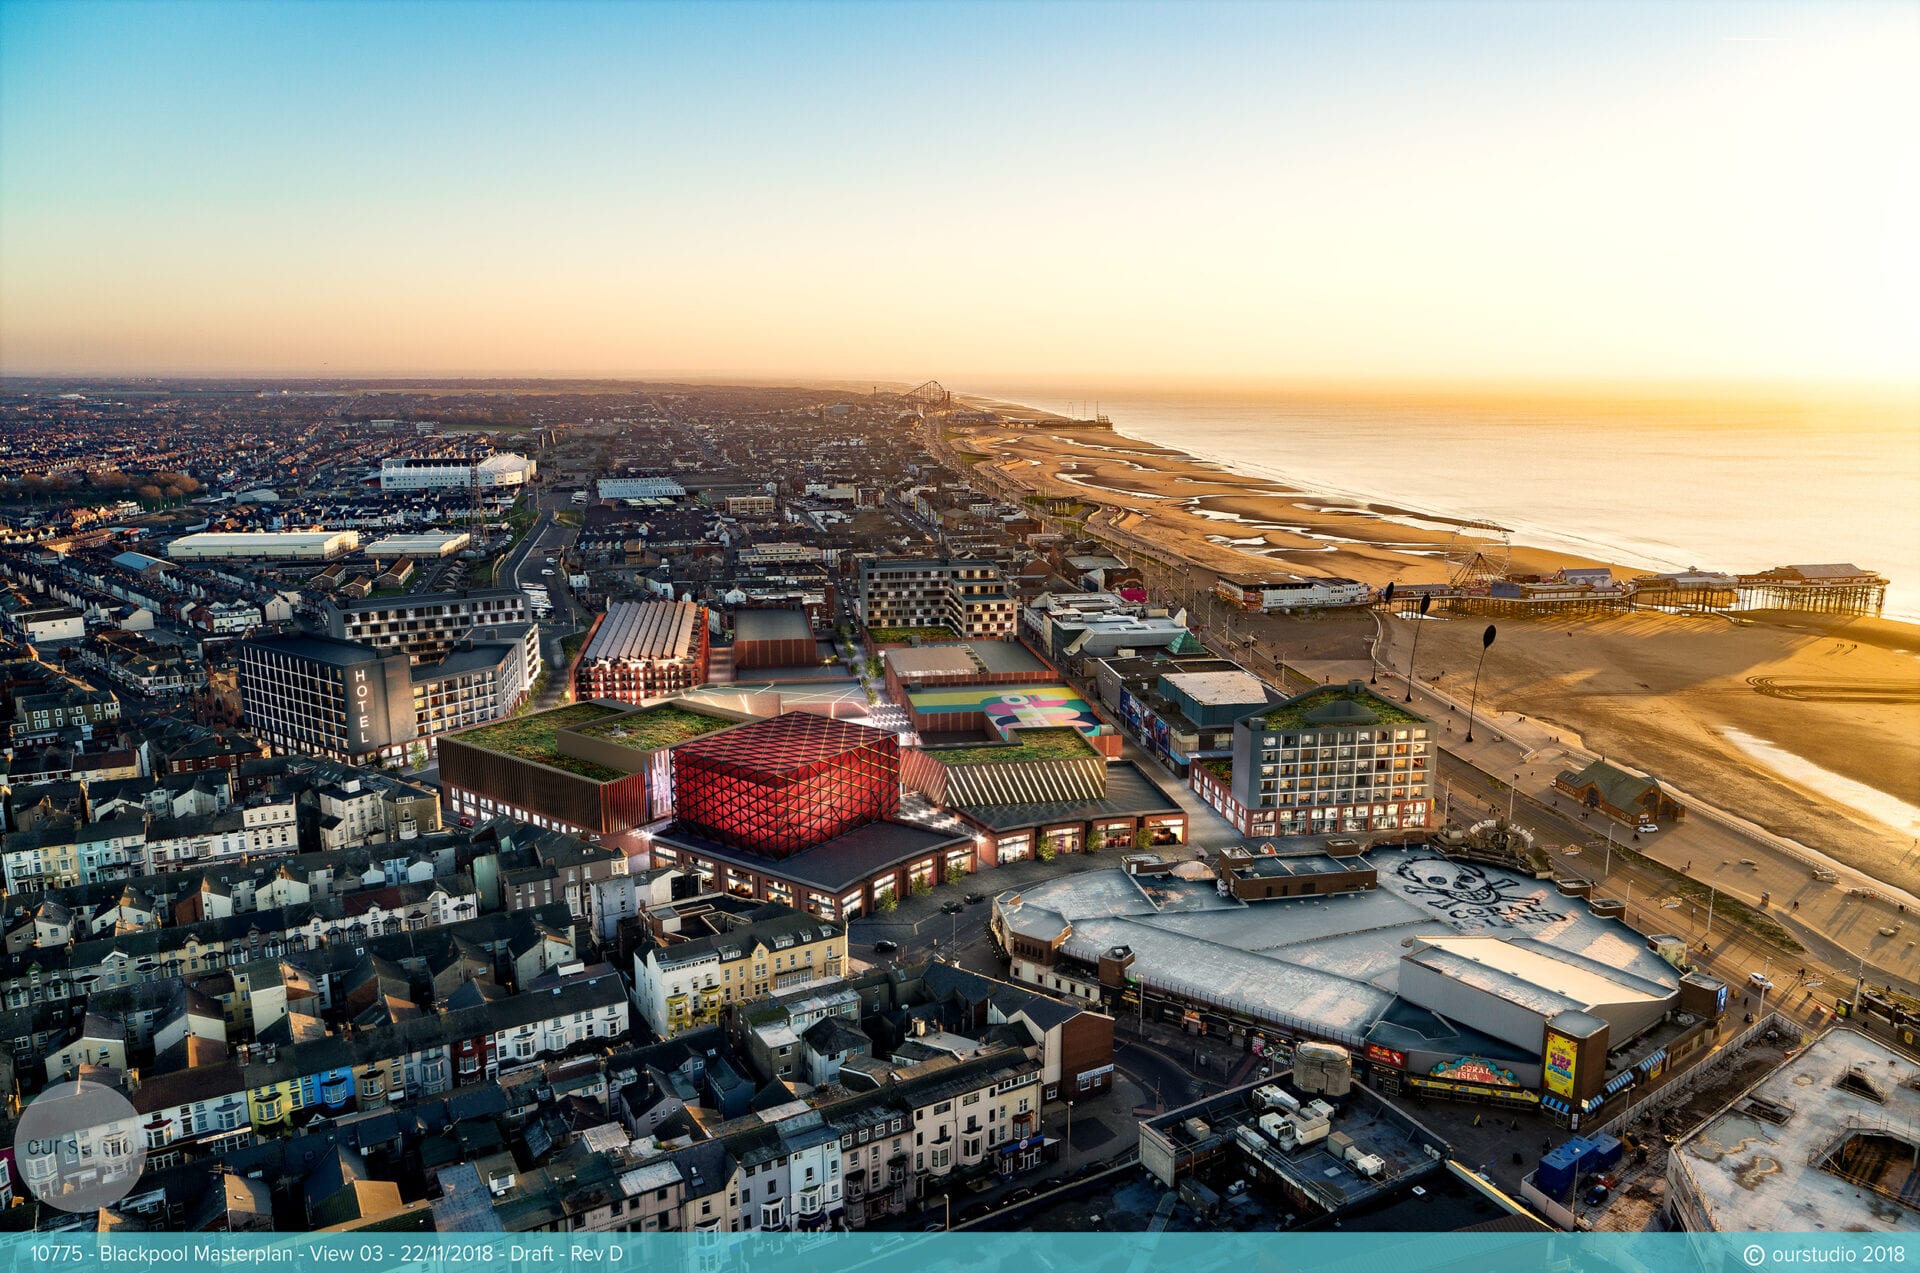 Proposal for a Blackpool Town Deal